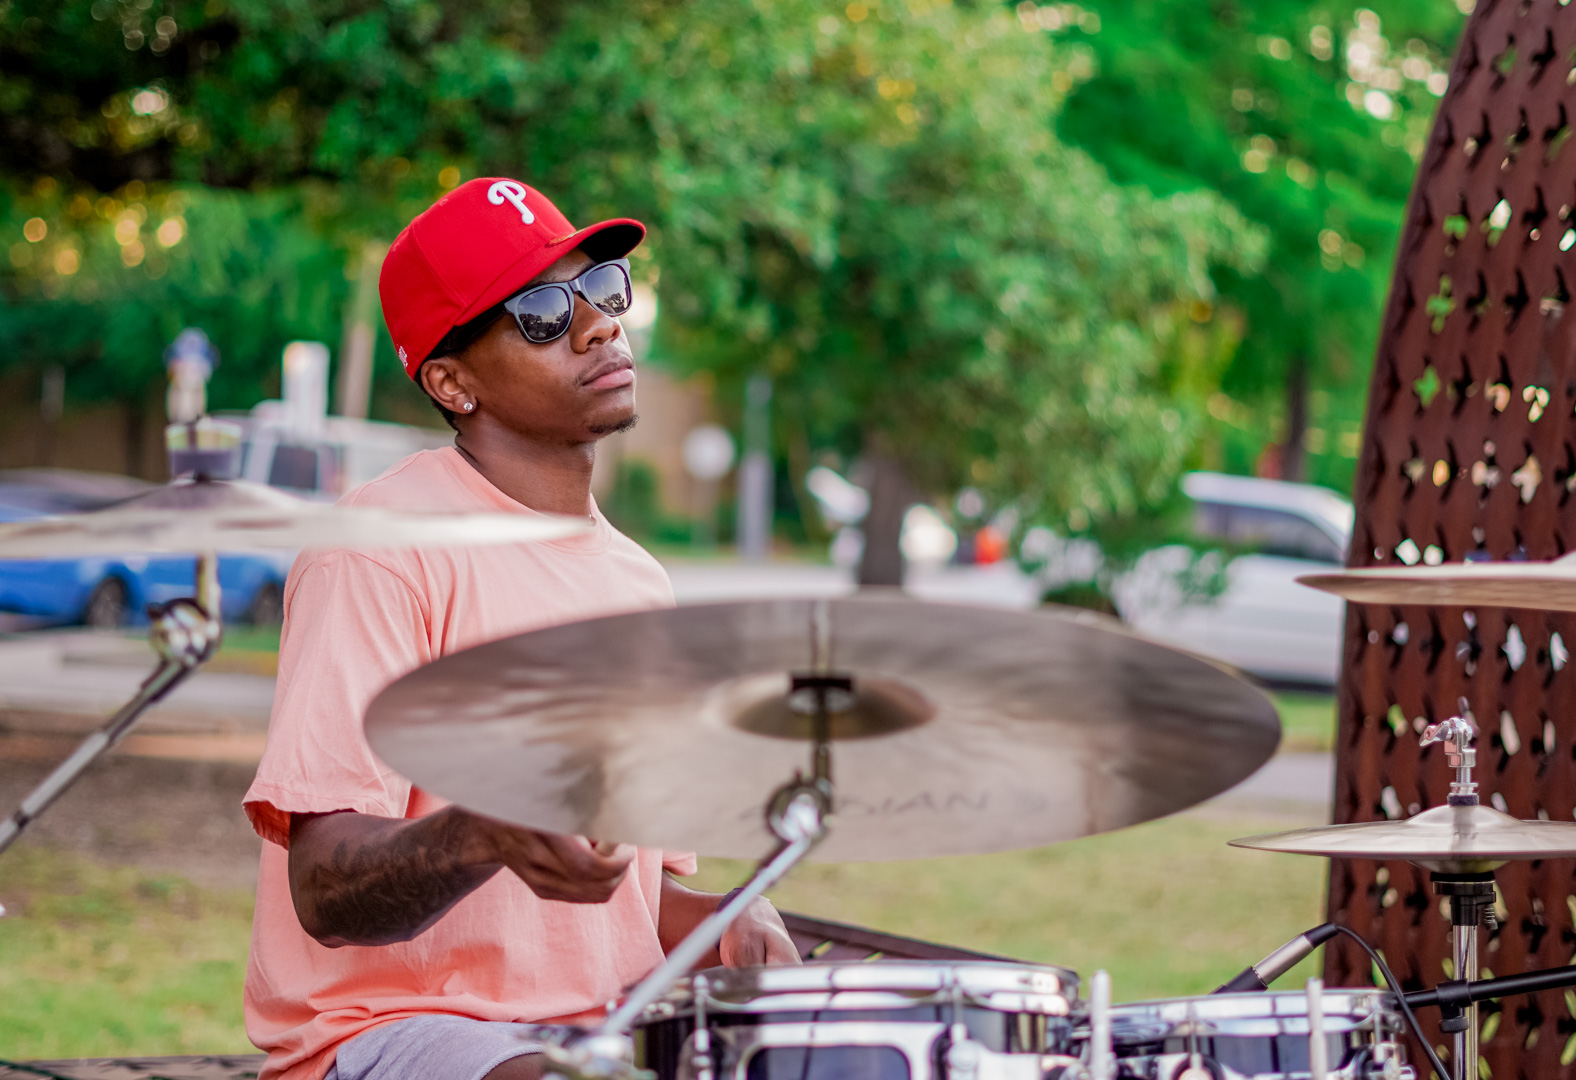 A drummer plays in red hat